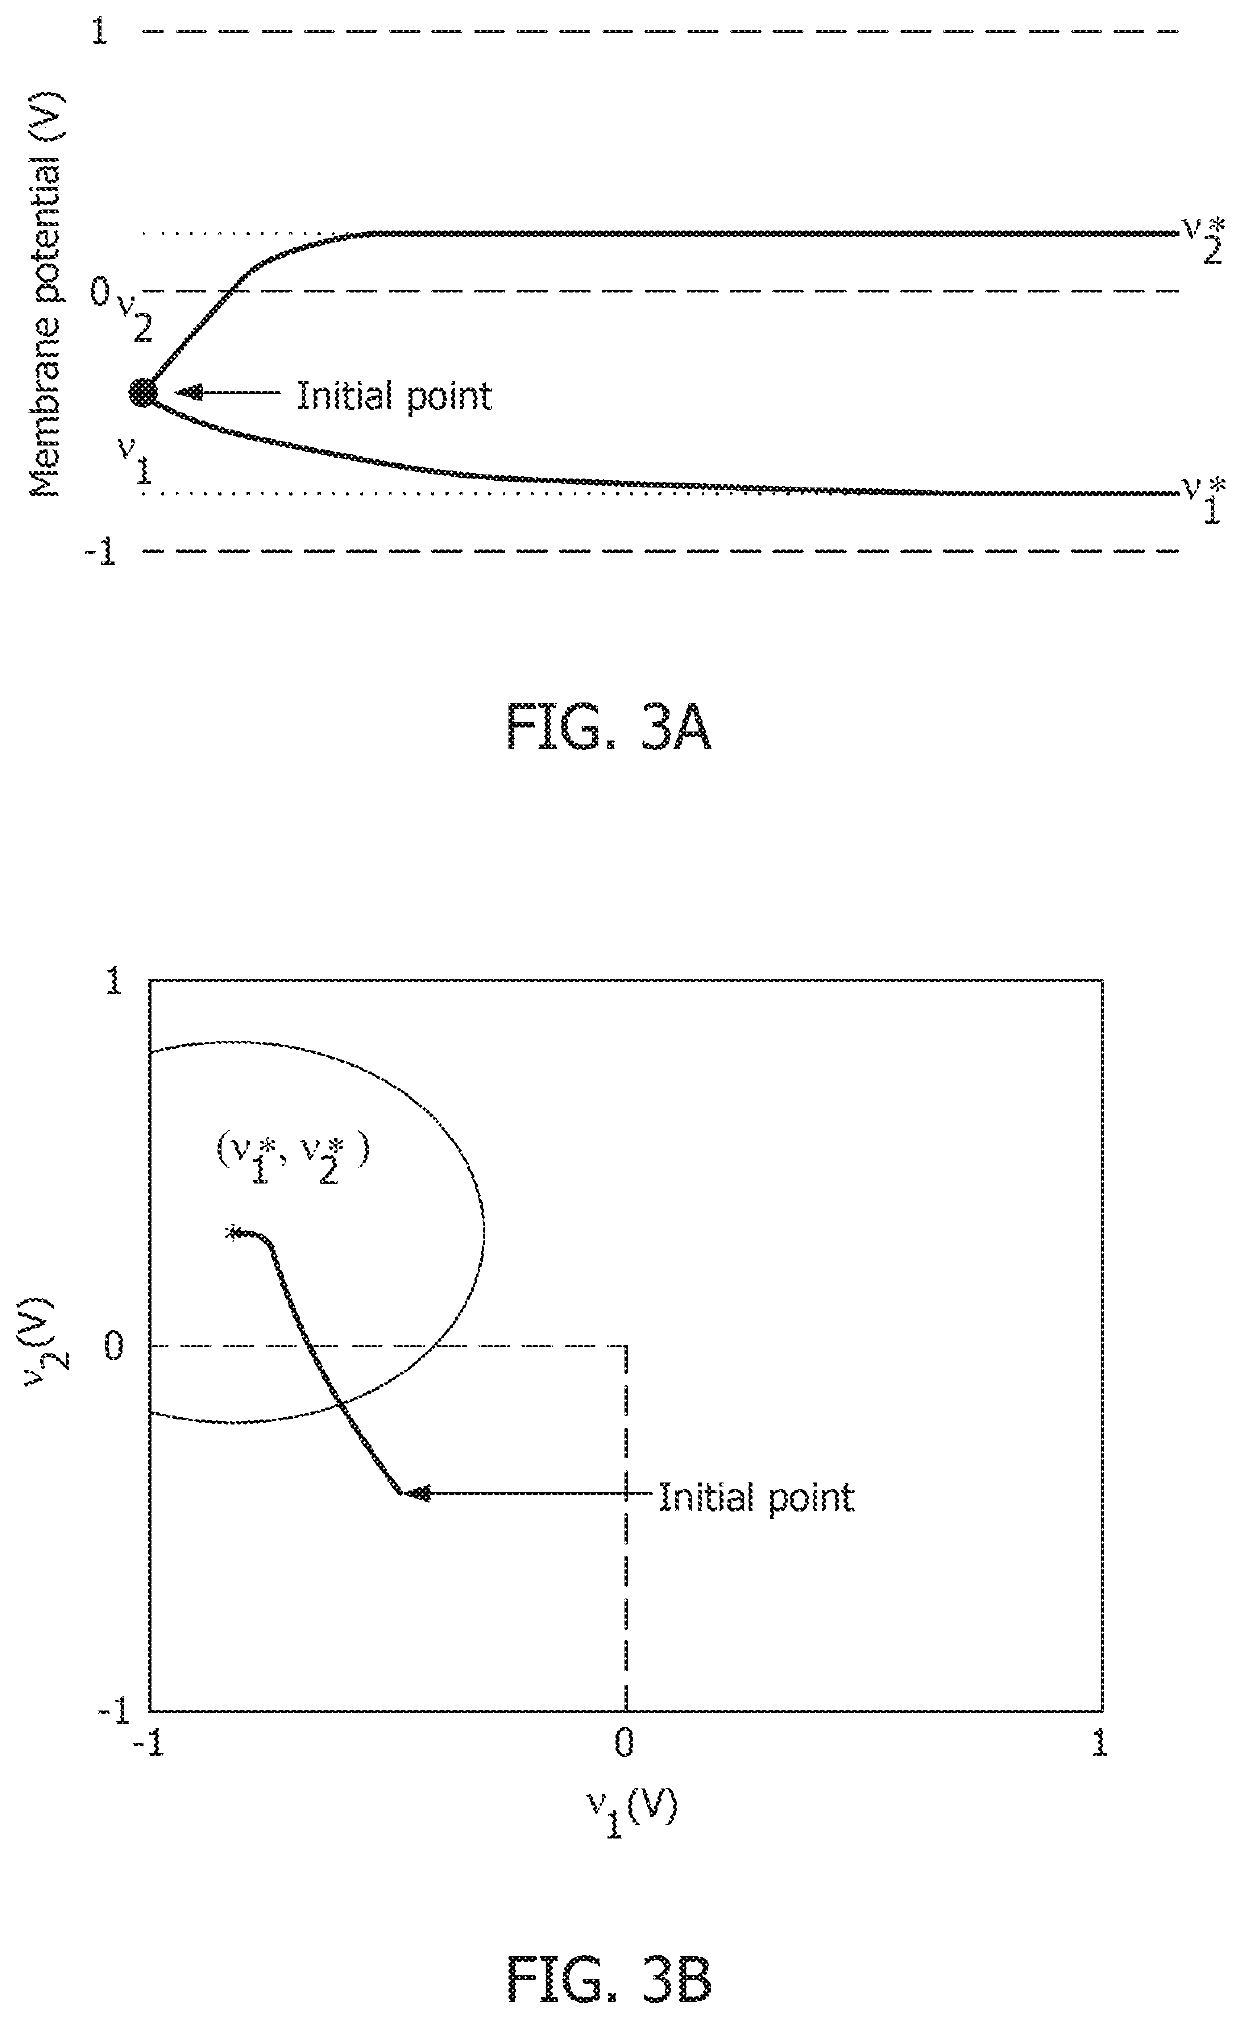 Method for designing scalable and energy-efficient analog neuromorphic processors